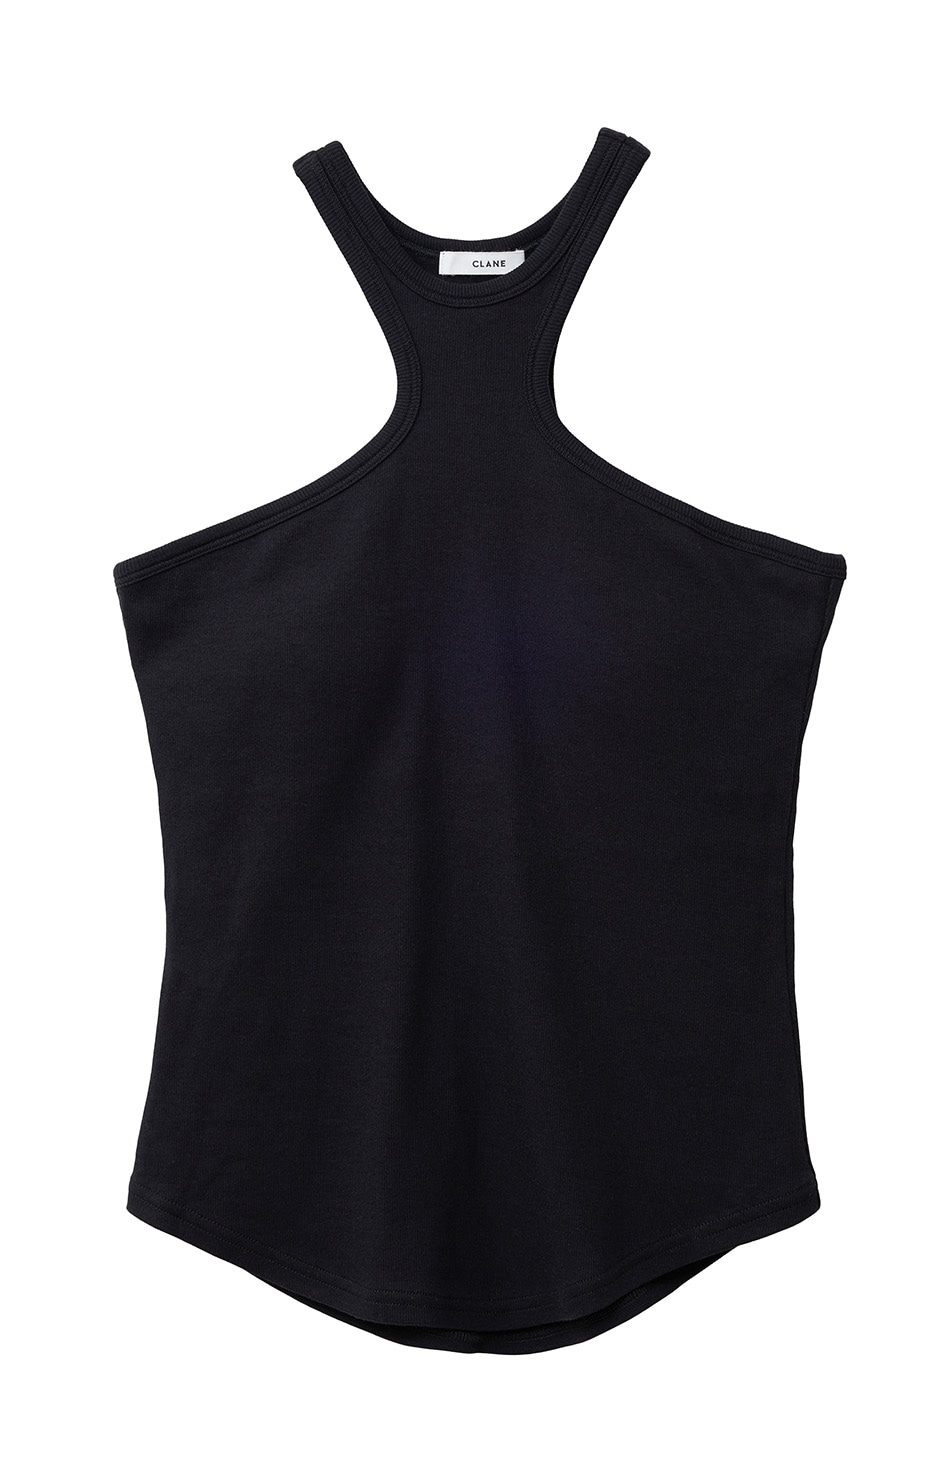 EDGY CUT TANK TOPS｜TOPS(トップス)｜CLANE OFFICIAL ONLINE STORE